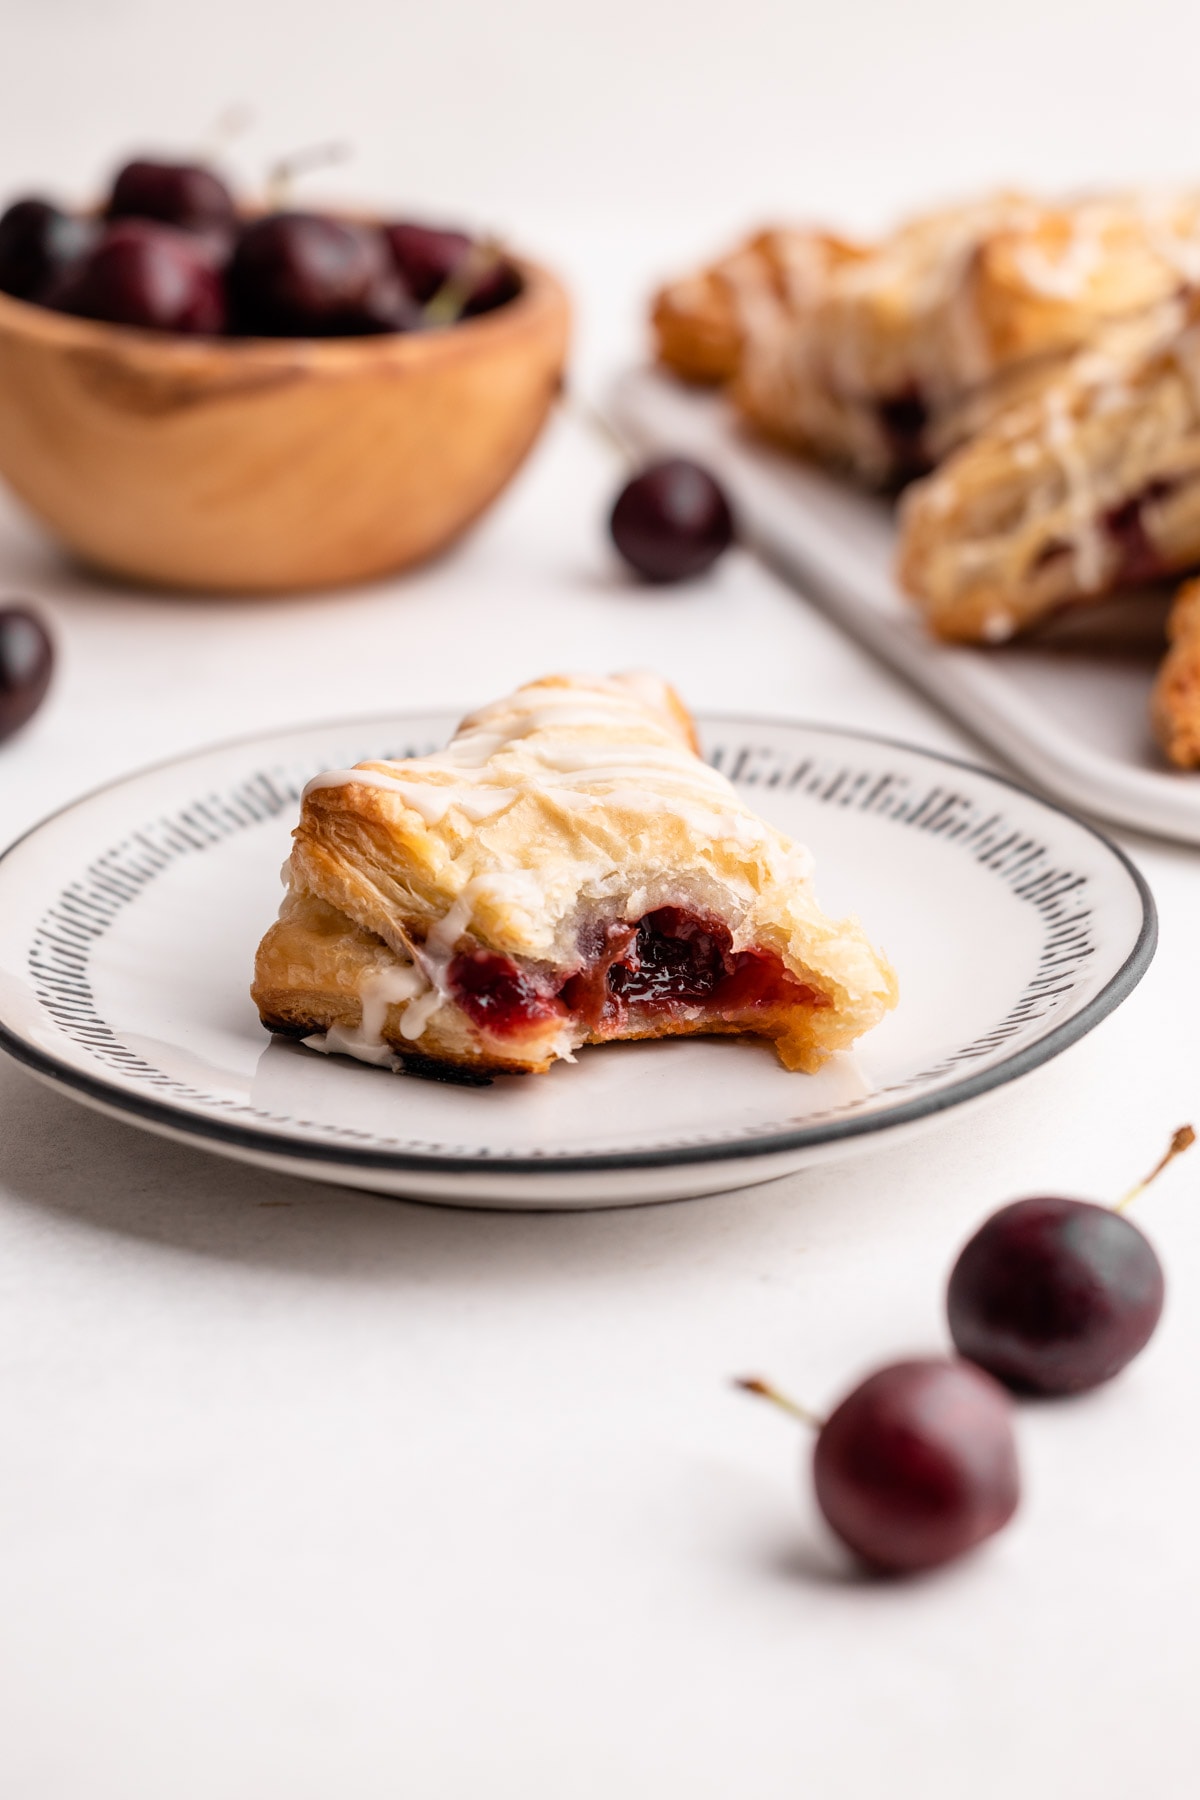 Baked cherry turnovers